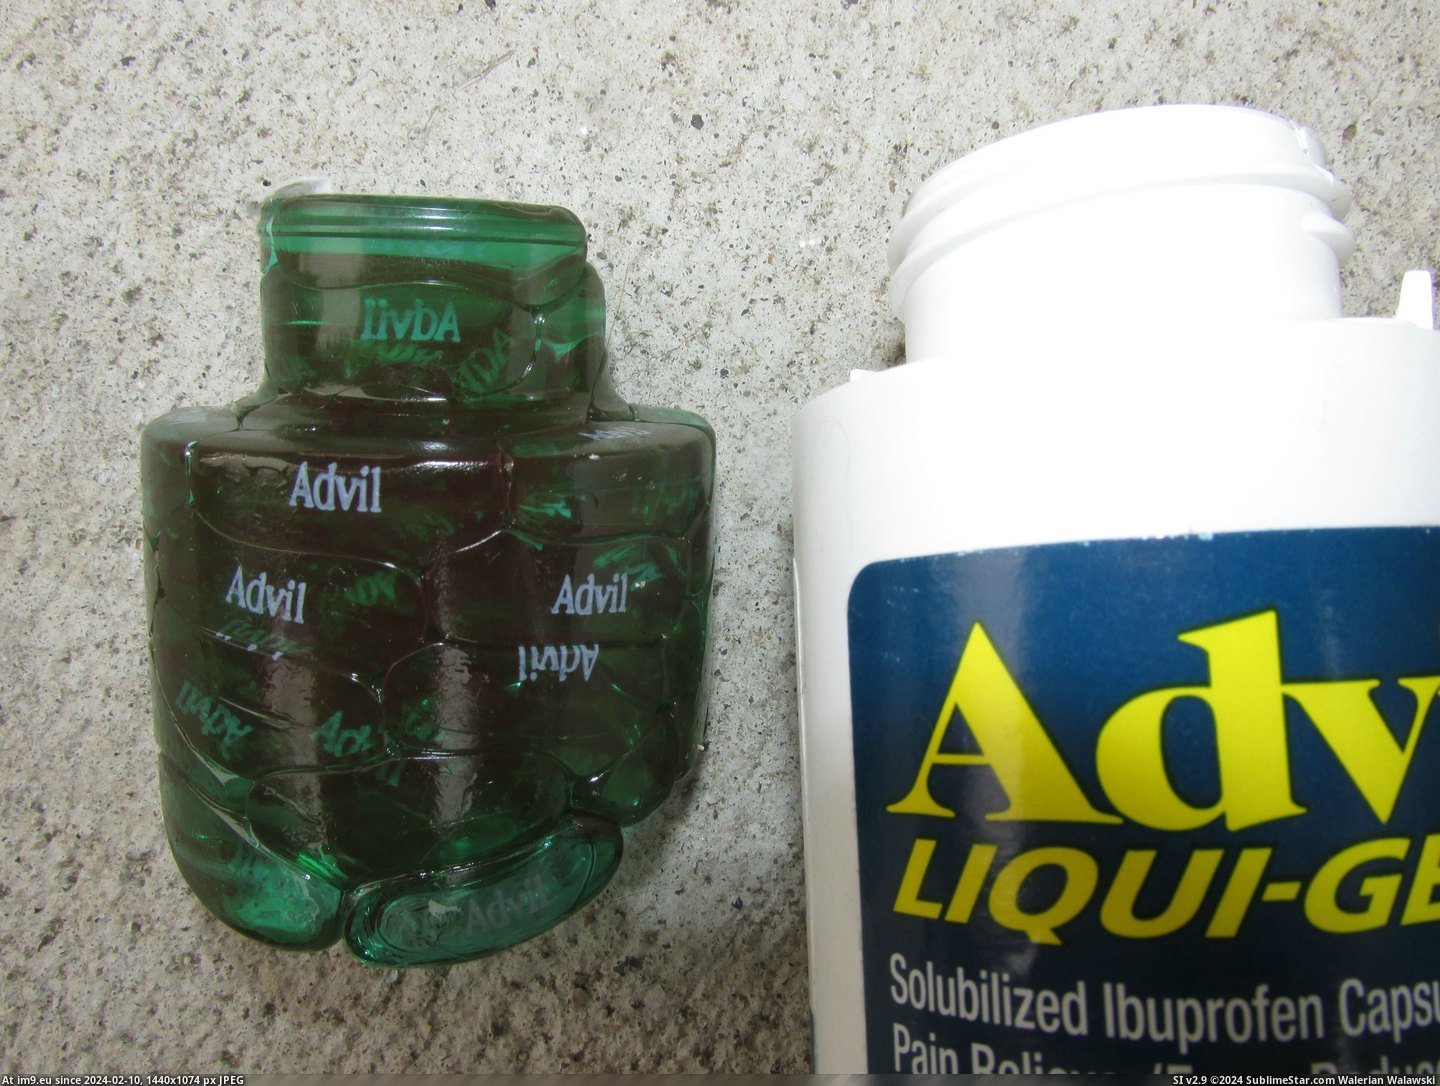 #Hot #Months #Advil #Car [Pics] Advil after many months in a hot car Pic. (Image of album My r/PICS favs))